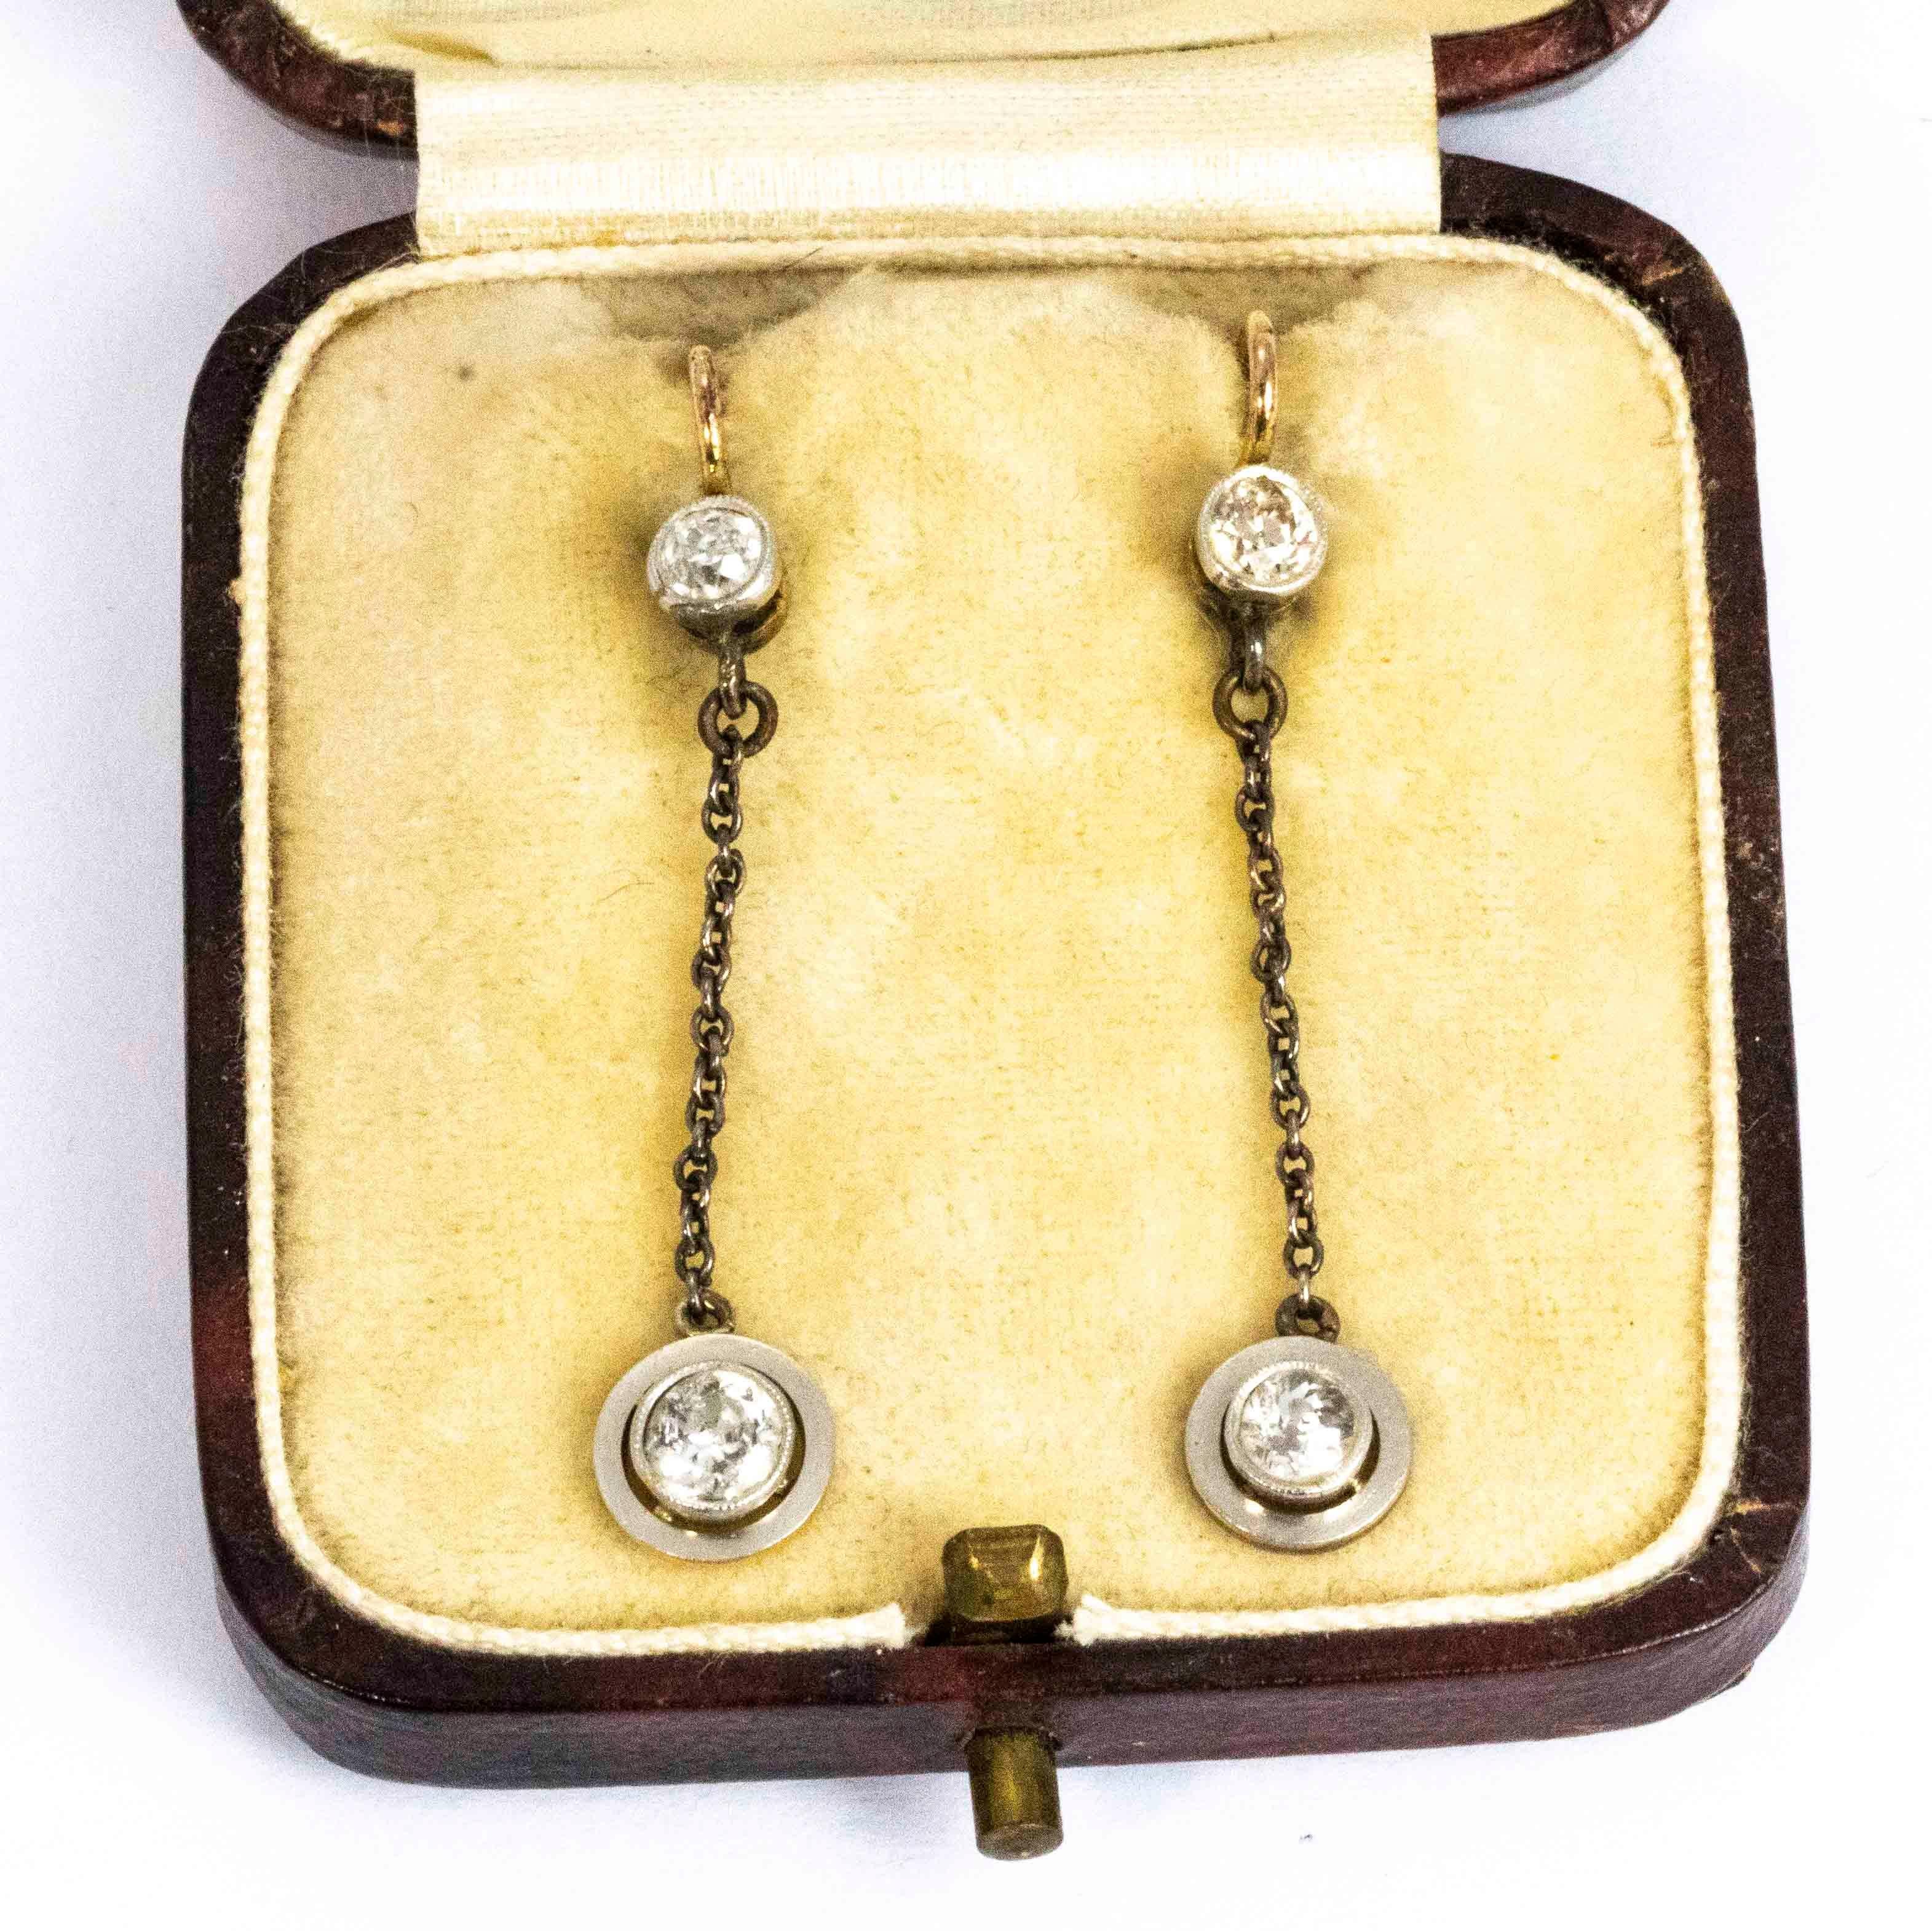 An exquisite pair of antique dangle earrings from the Edwardian period. Each earring starts with a stunning 18 point old European cut white diamond with a hooked back. Hanging below on an elegant chain sit 25 point diamonds in beautiful white gold